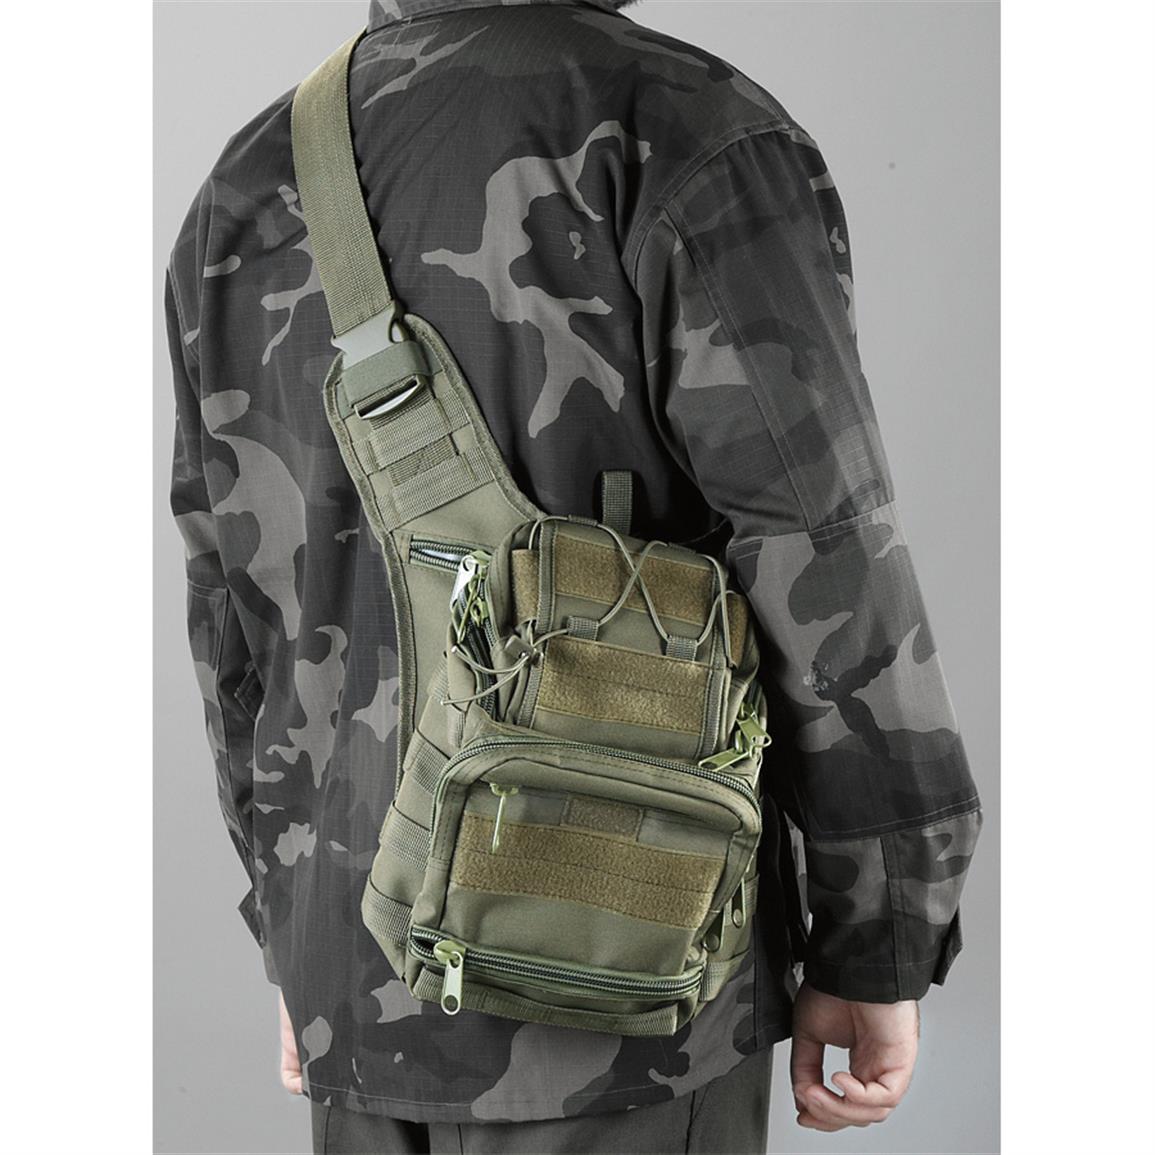 Cactus Jack Tactical Sling Bag - 614667, Military Style Backpacks & Bags at Sportsman&#39;s Guide